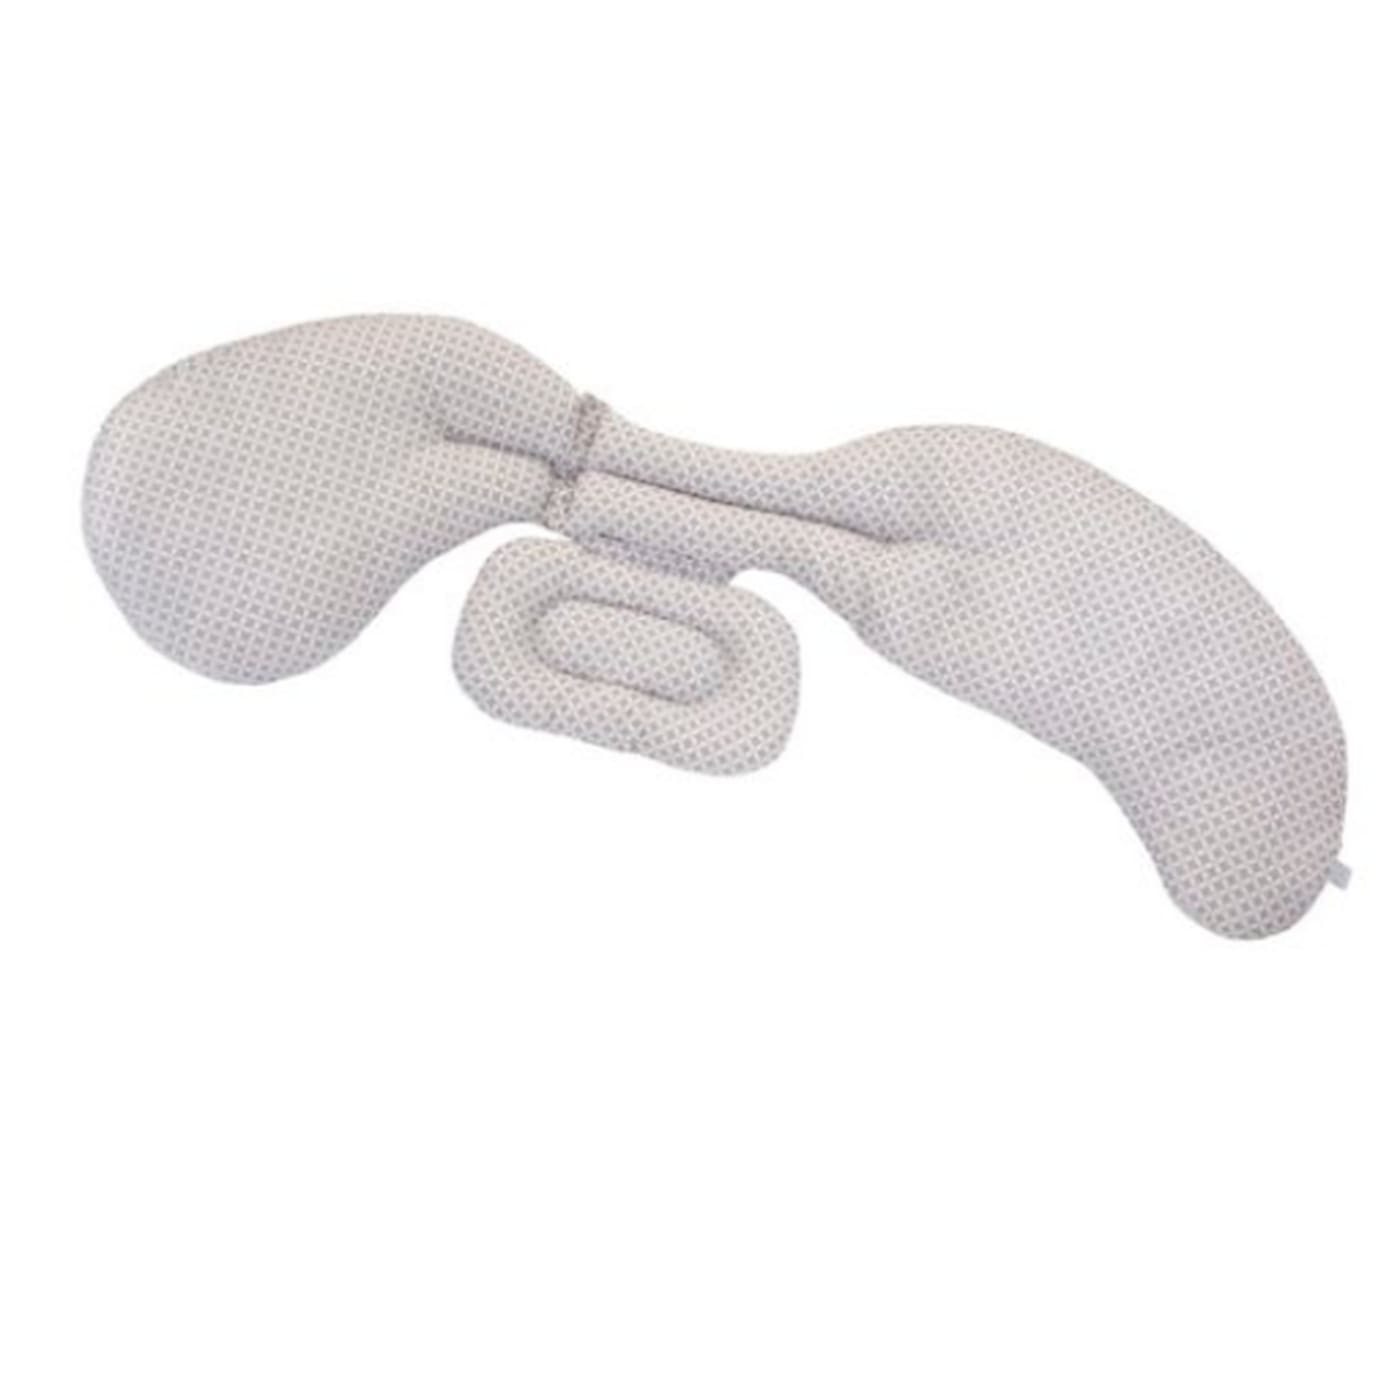 Chicco Boppy Total Body Pillow - Sand - Sand - FOR MUM - MATERNITY PILLOWS